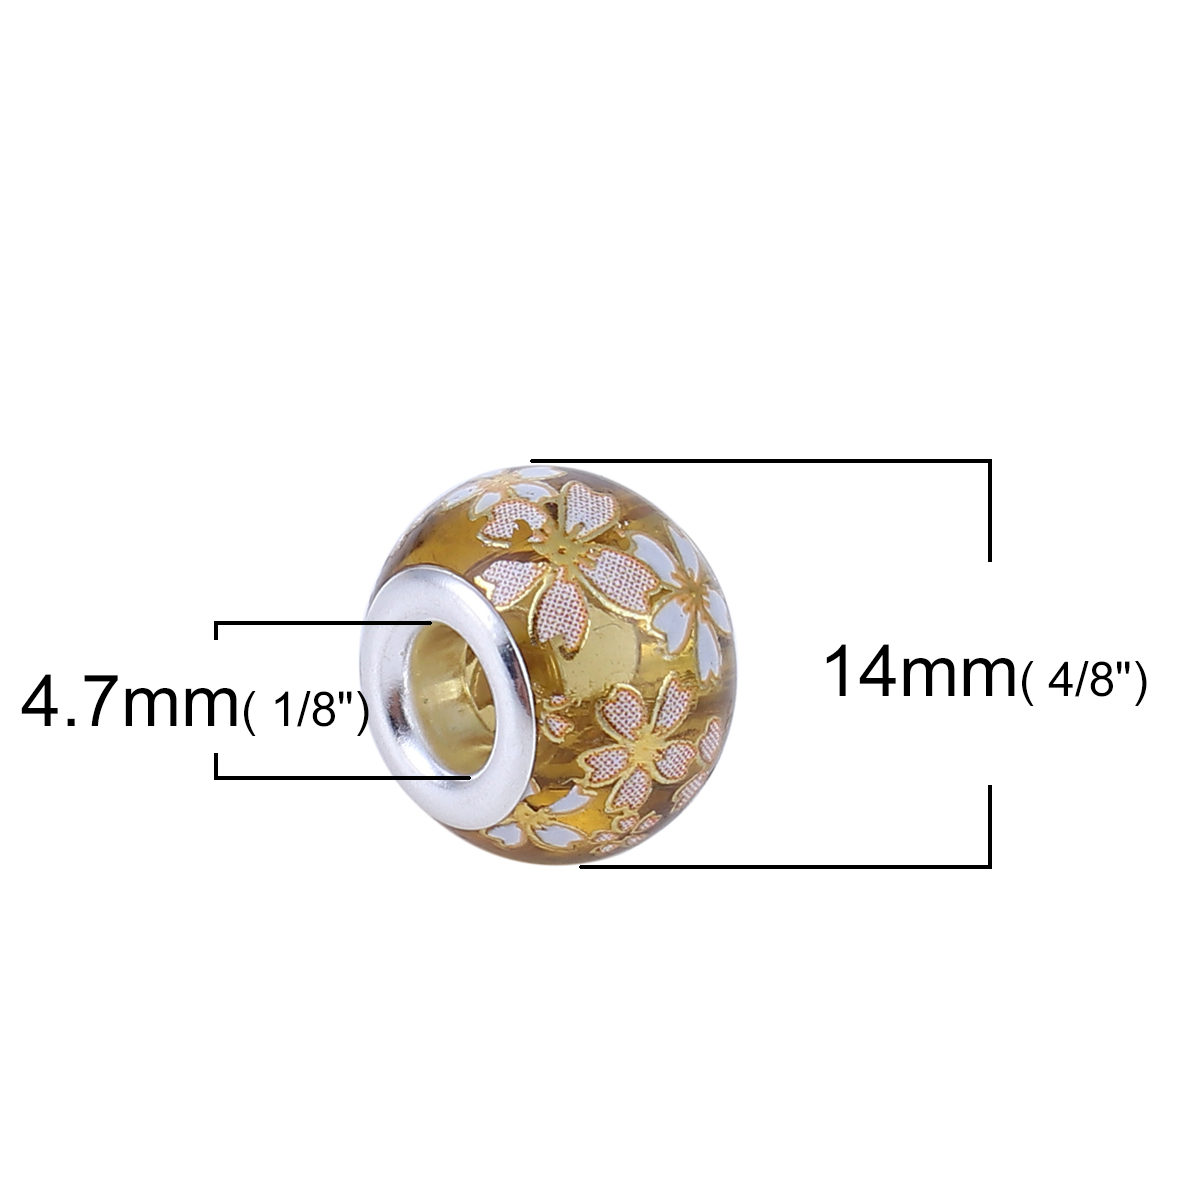 Picture of Glass Japan Painting Vintage Japanese Tensha European Style Large Hole Charm Beads Round Silver Plated Sakura Flower Amber Transparent About 14mm( 4/8") Dia, Hole: Approx 4.7mm, 5 PCs